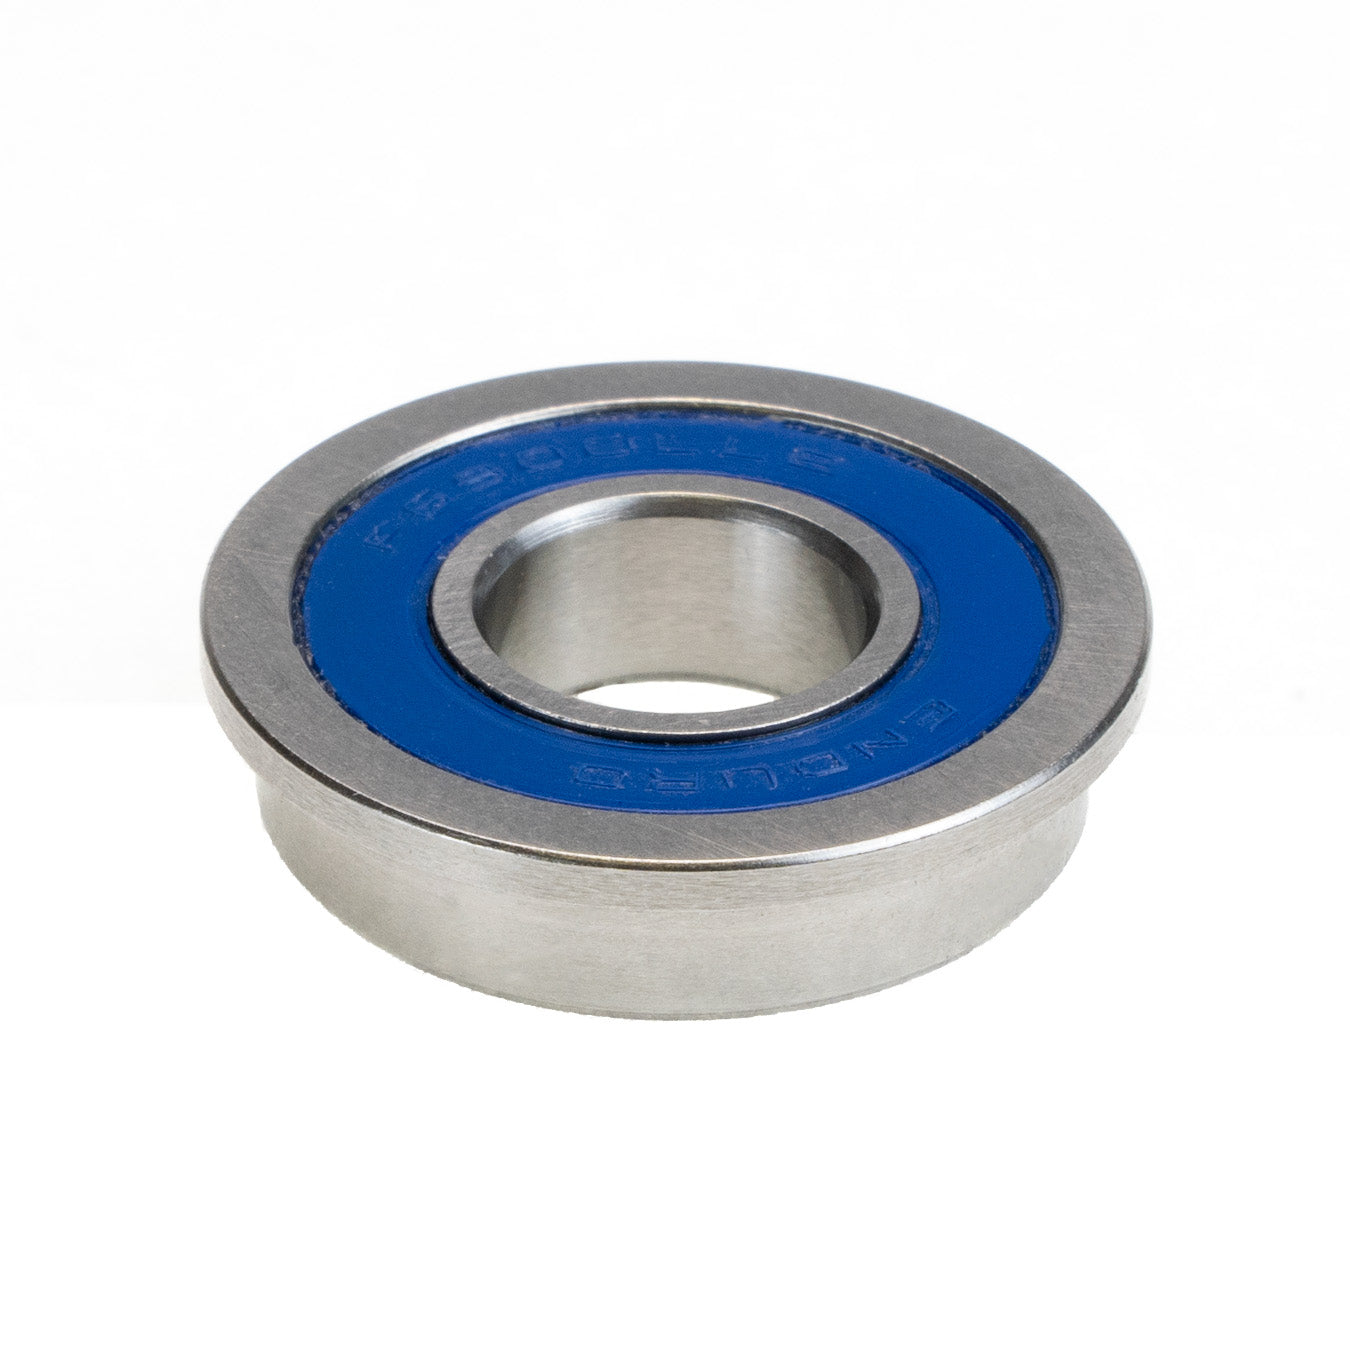 F6900 LLB - ABEC-3, Flanged, Radial Bearing (C3 Clearance) - 10mm x 22/24mm x 8mm